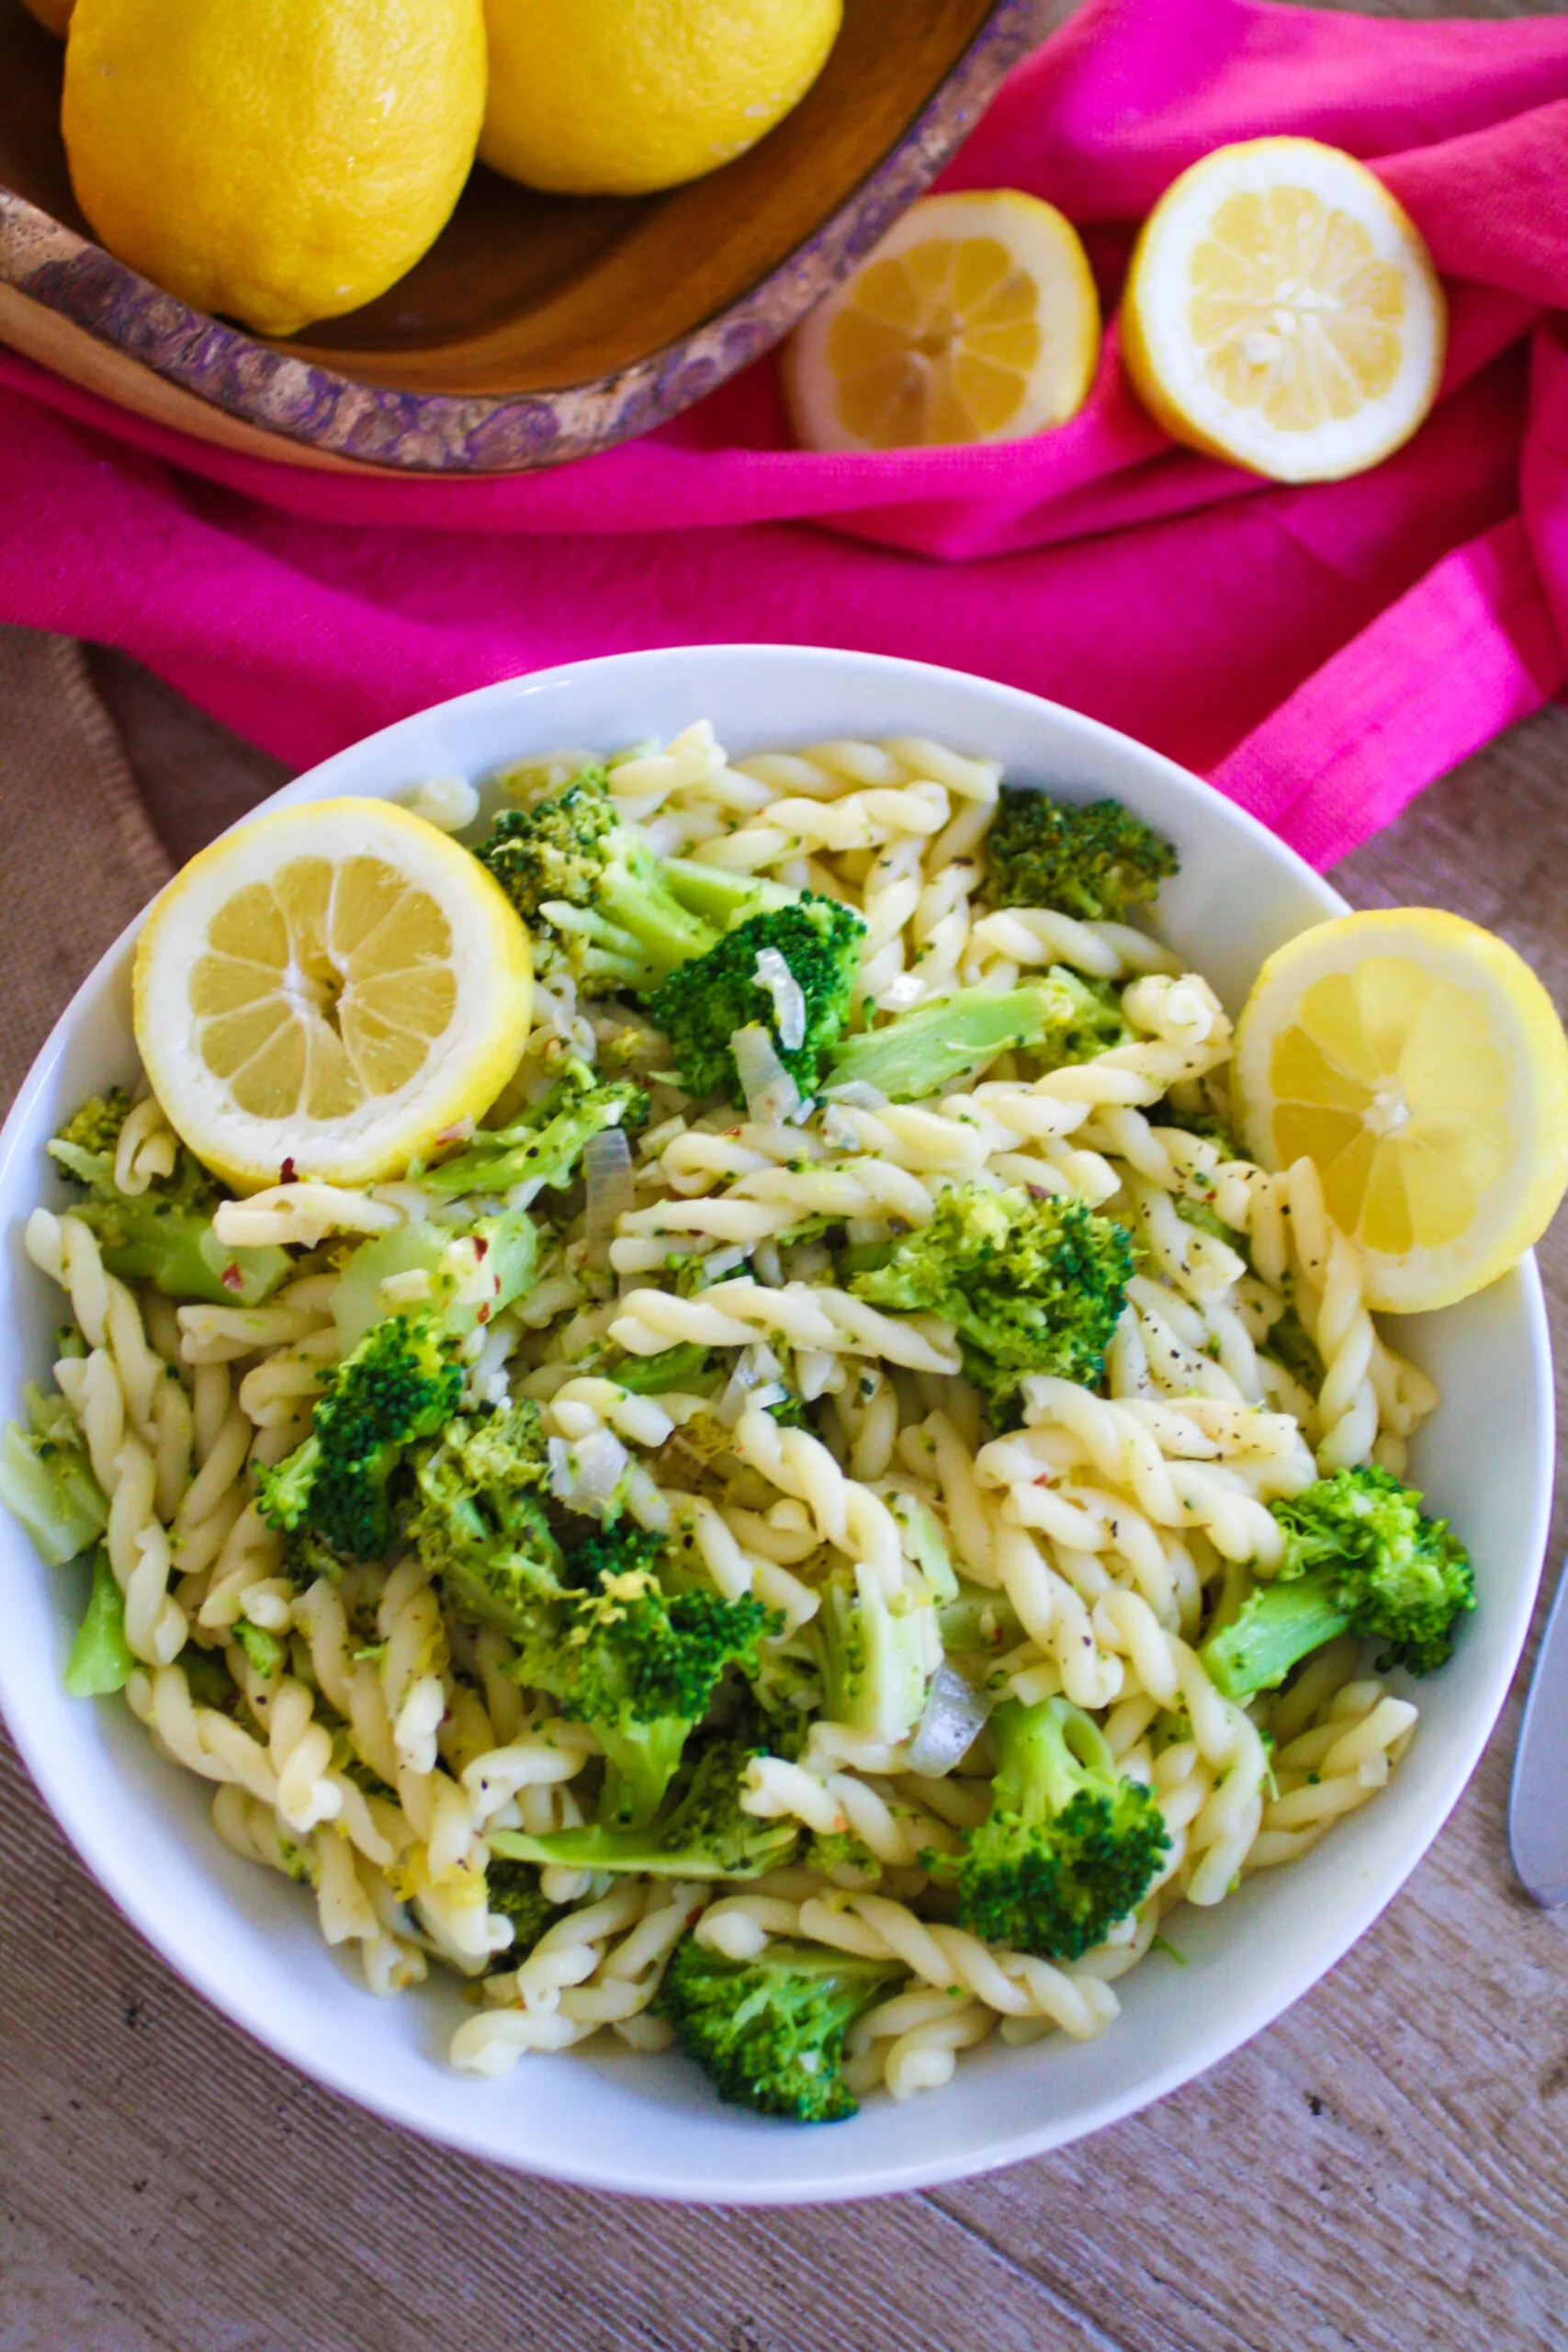 Lemony Broccoli Pasta is bright, colorful, and full of flavor for any meal!